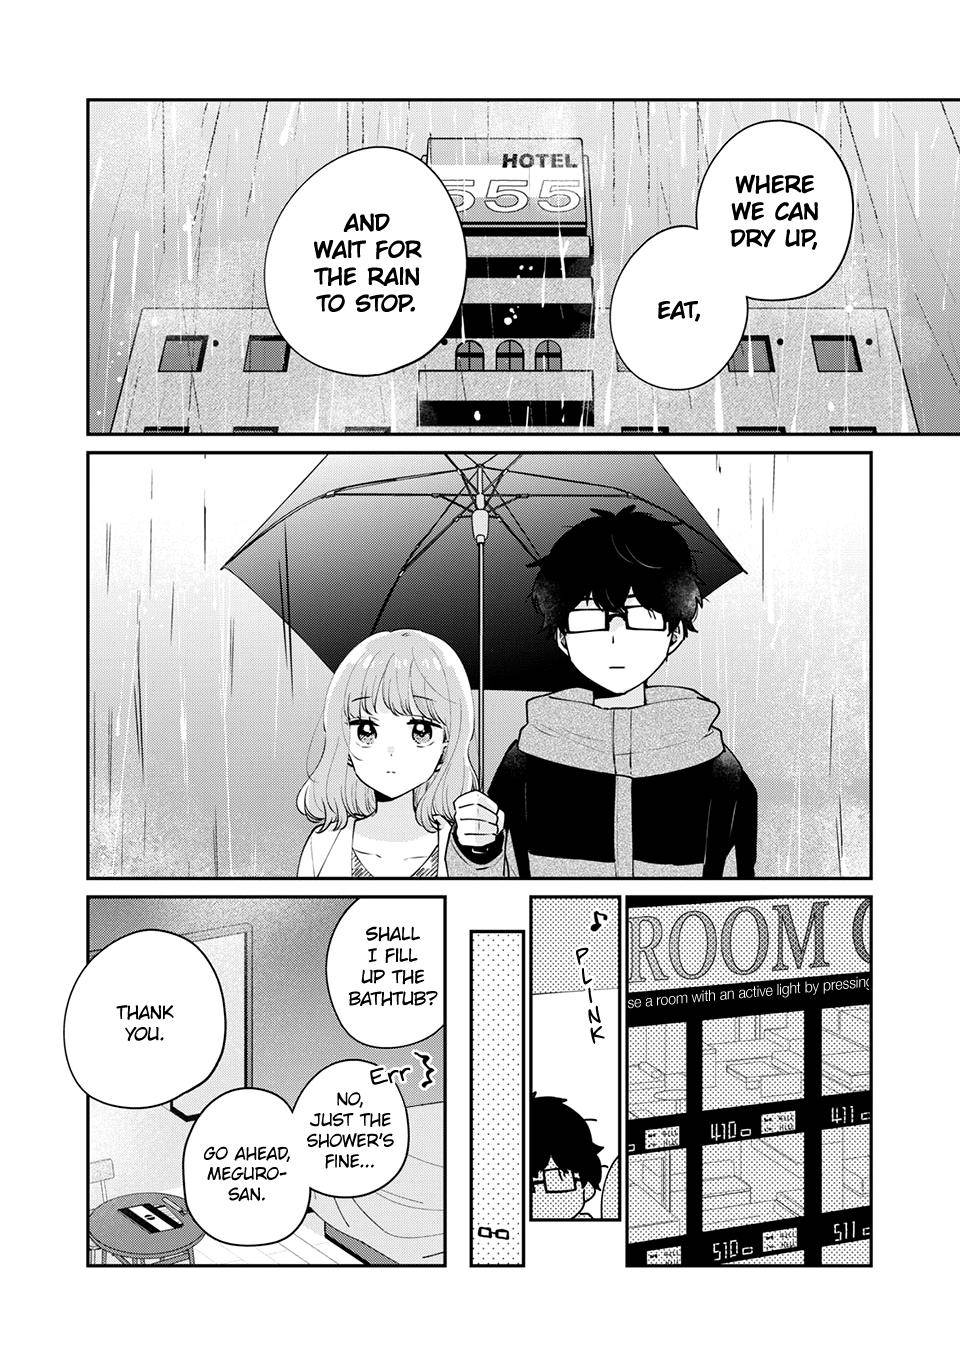 It's Not Meguro-san's First Time chapter 50 page 9